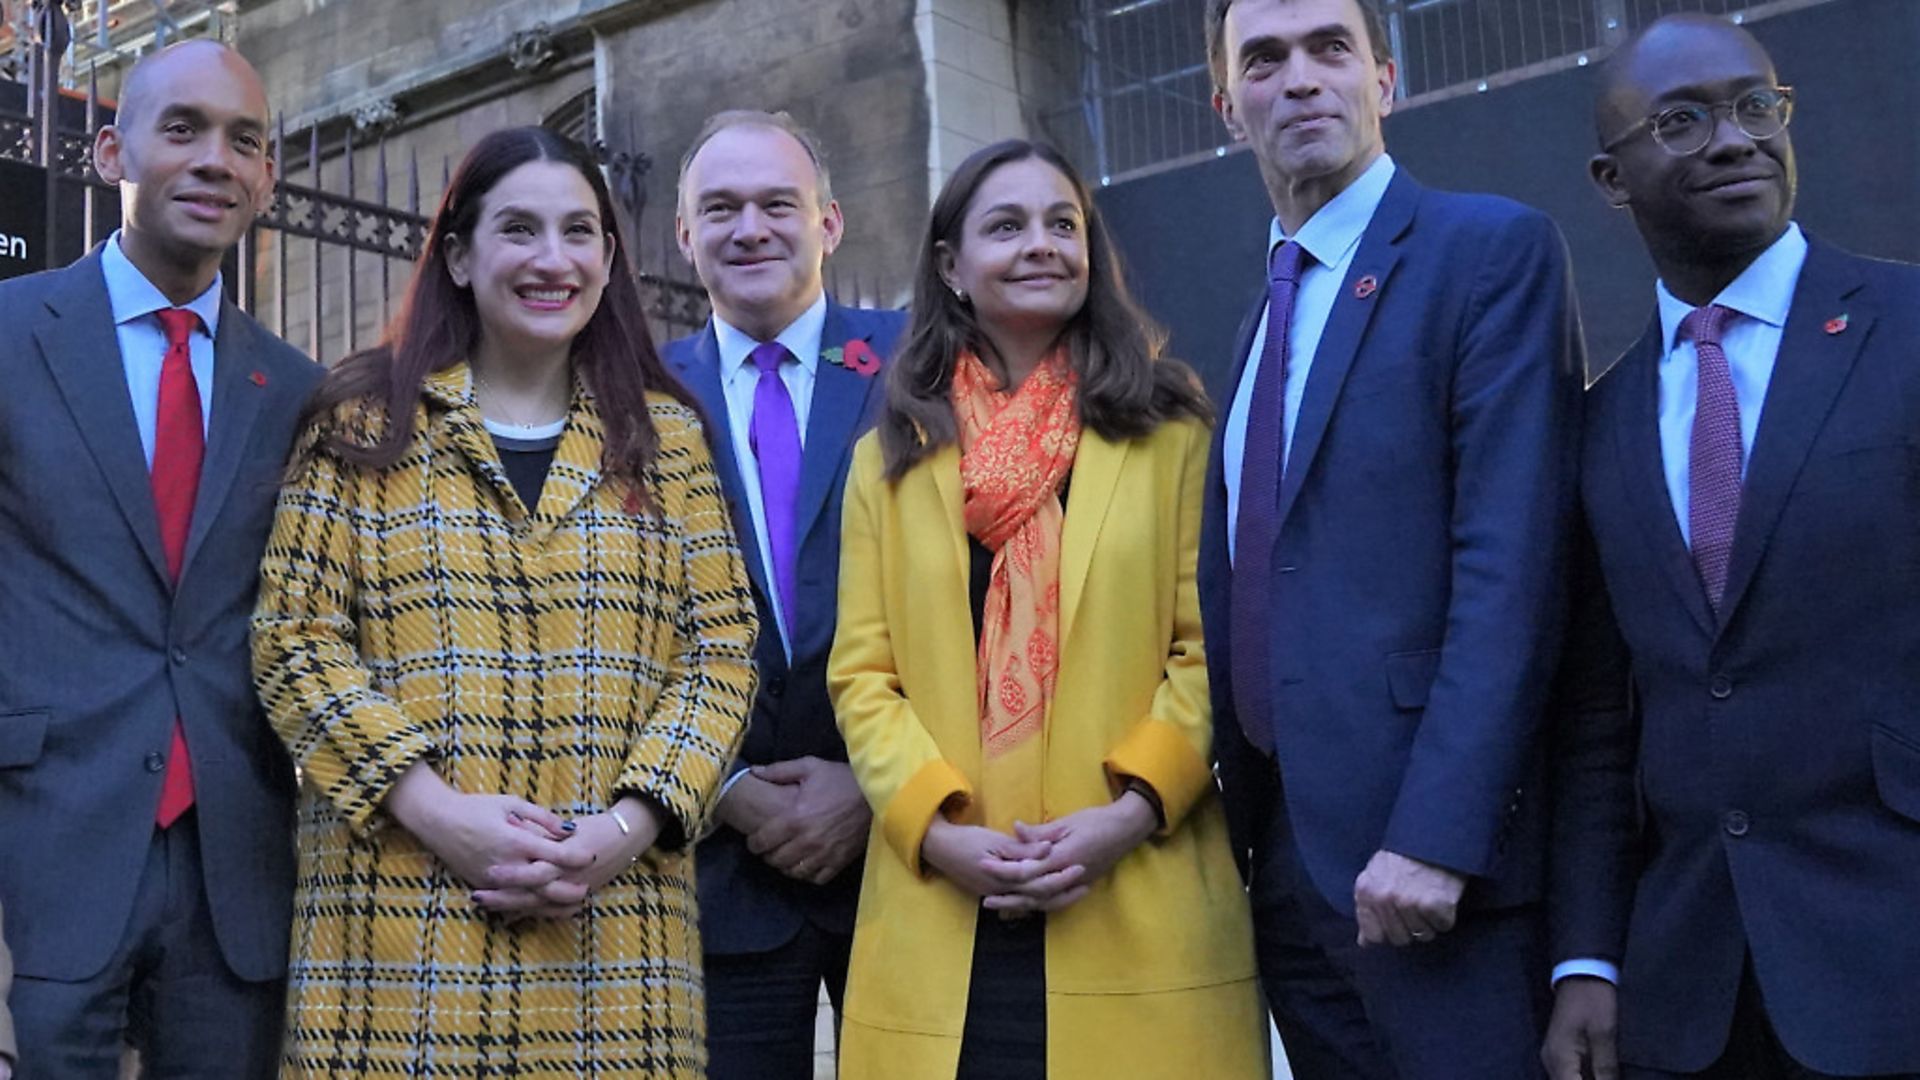 Liberal Democrat politicians (from left to right) Chuka Umunna, Luciana Berger, Ed Davey, Siobhan Benita, Tom Brake, Sam Gyimah, after Leader of the Liberal Democrats Jo Swinson. Photograph: Liberal Democrats/PA Wire. - Credit: PA